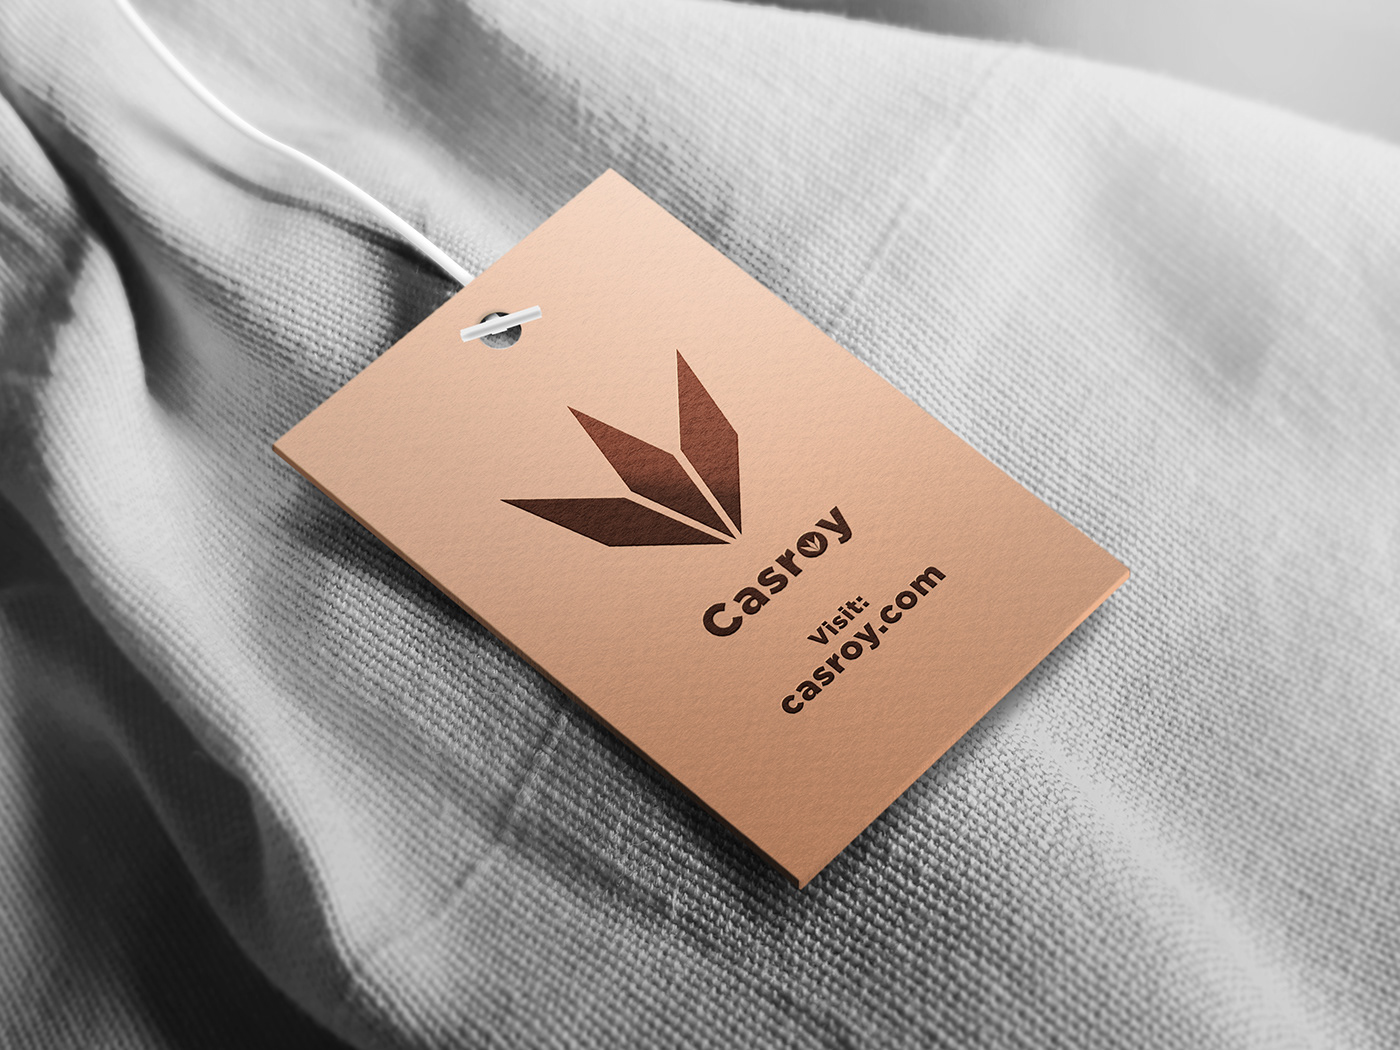 Image contains: Stylish clothing tags and label design for Casroy by Humza DZN.
